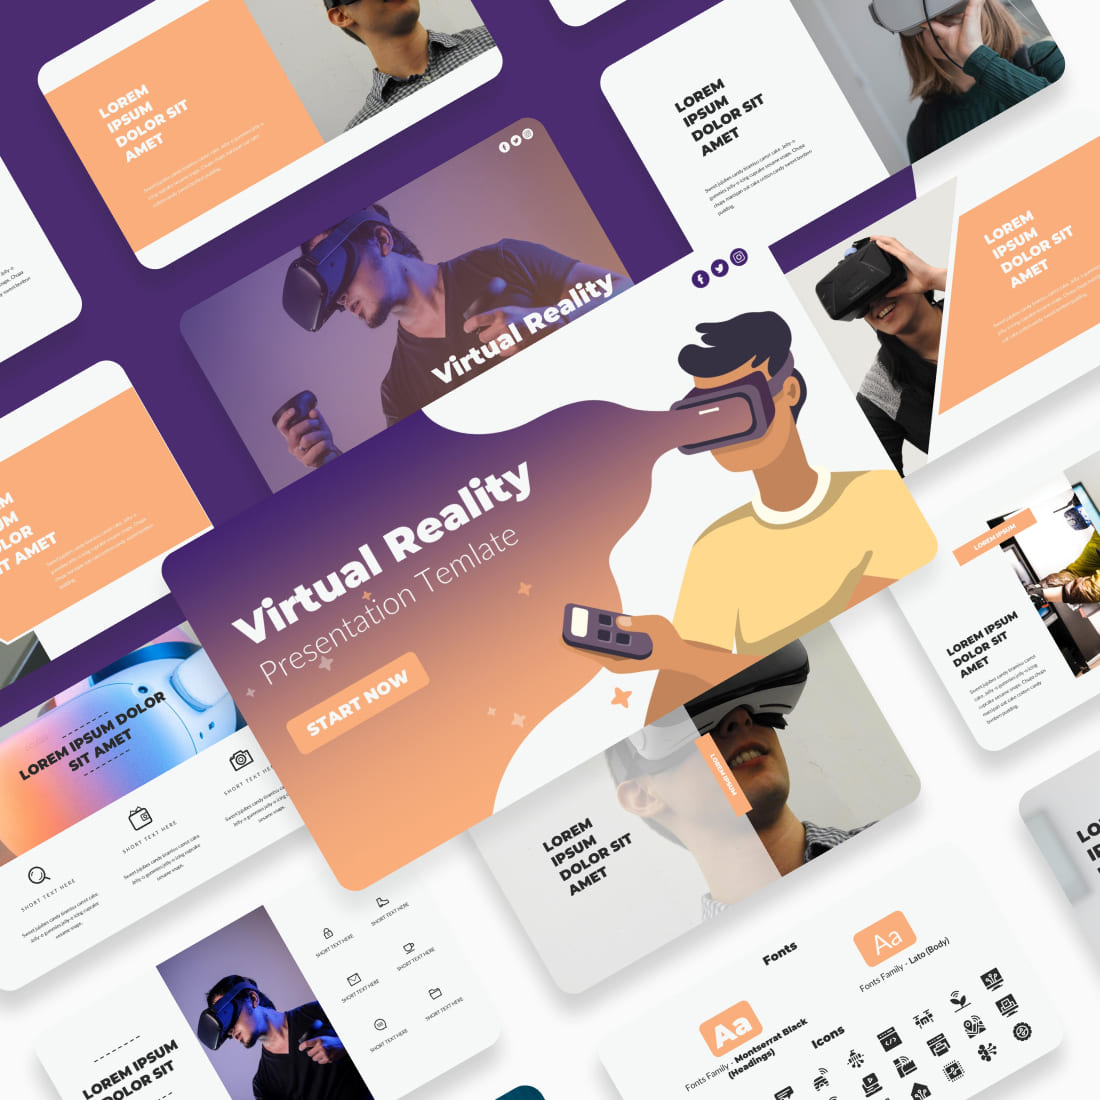 VR Technology PowerPoint Template cover image.